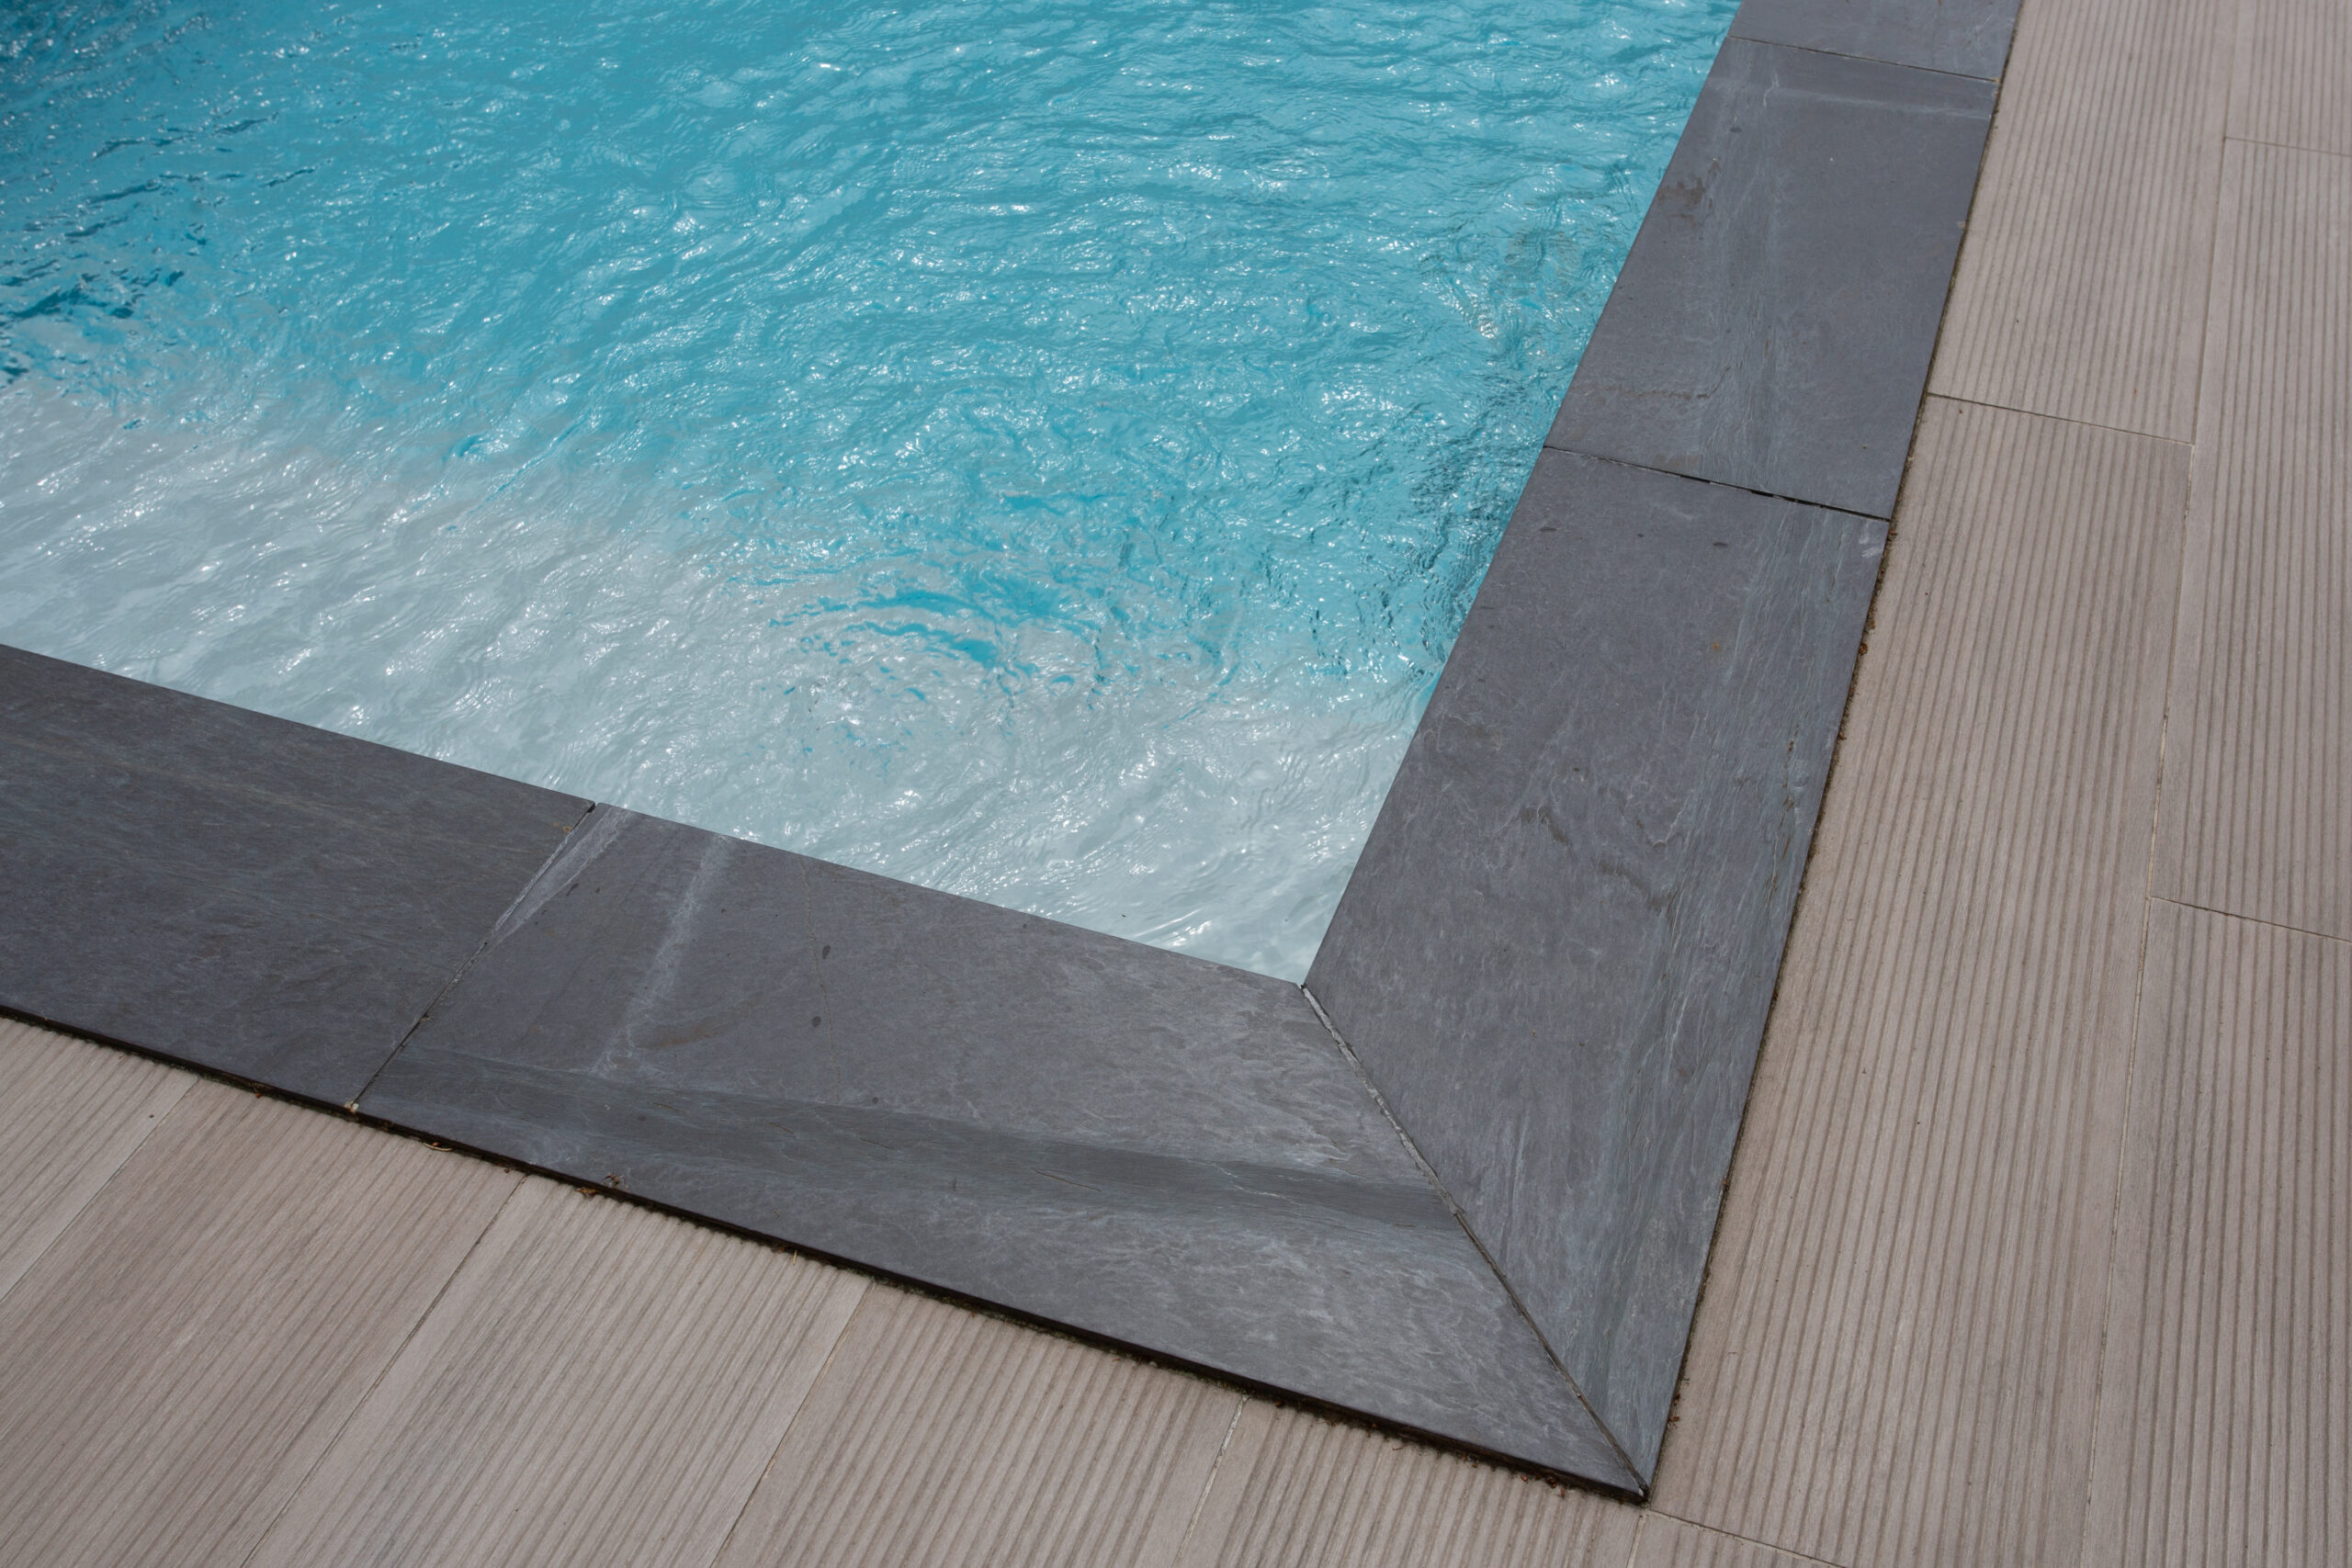 Installed coping for a pool, the protective and decorative edge material around the pool's perimeter.